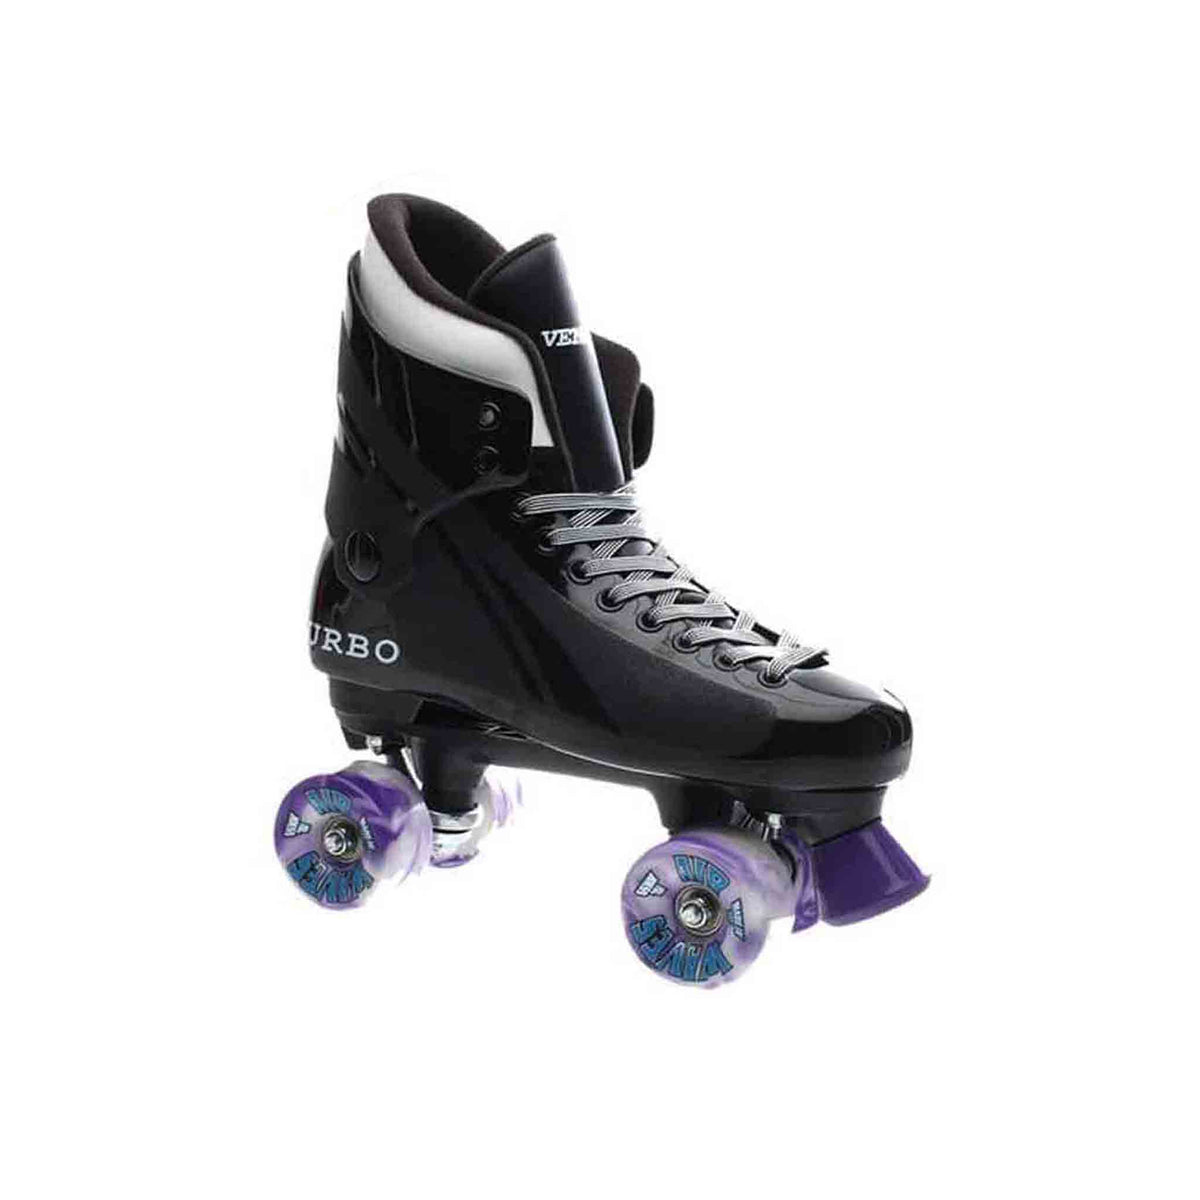 Ventro Turbo Pro with Air Waves Wheels and ABEC-5 Bearings - Roller Skates | JT Skate